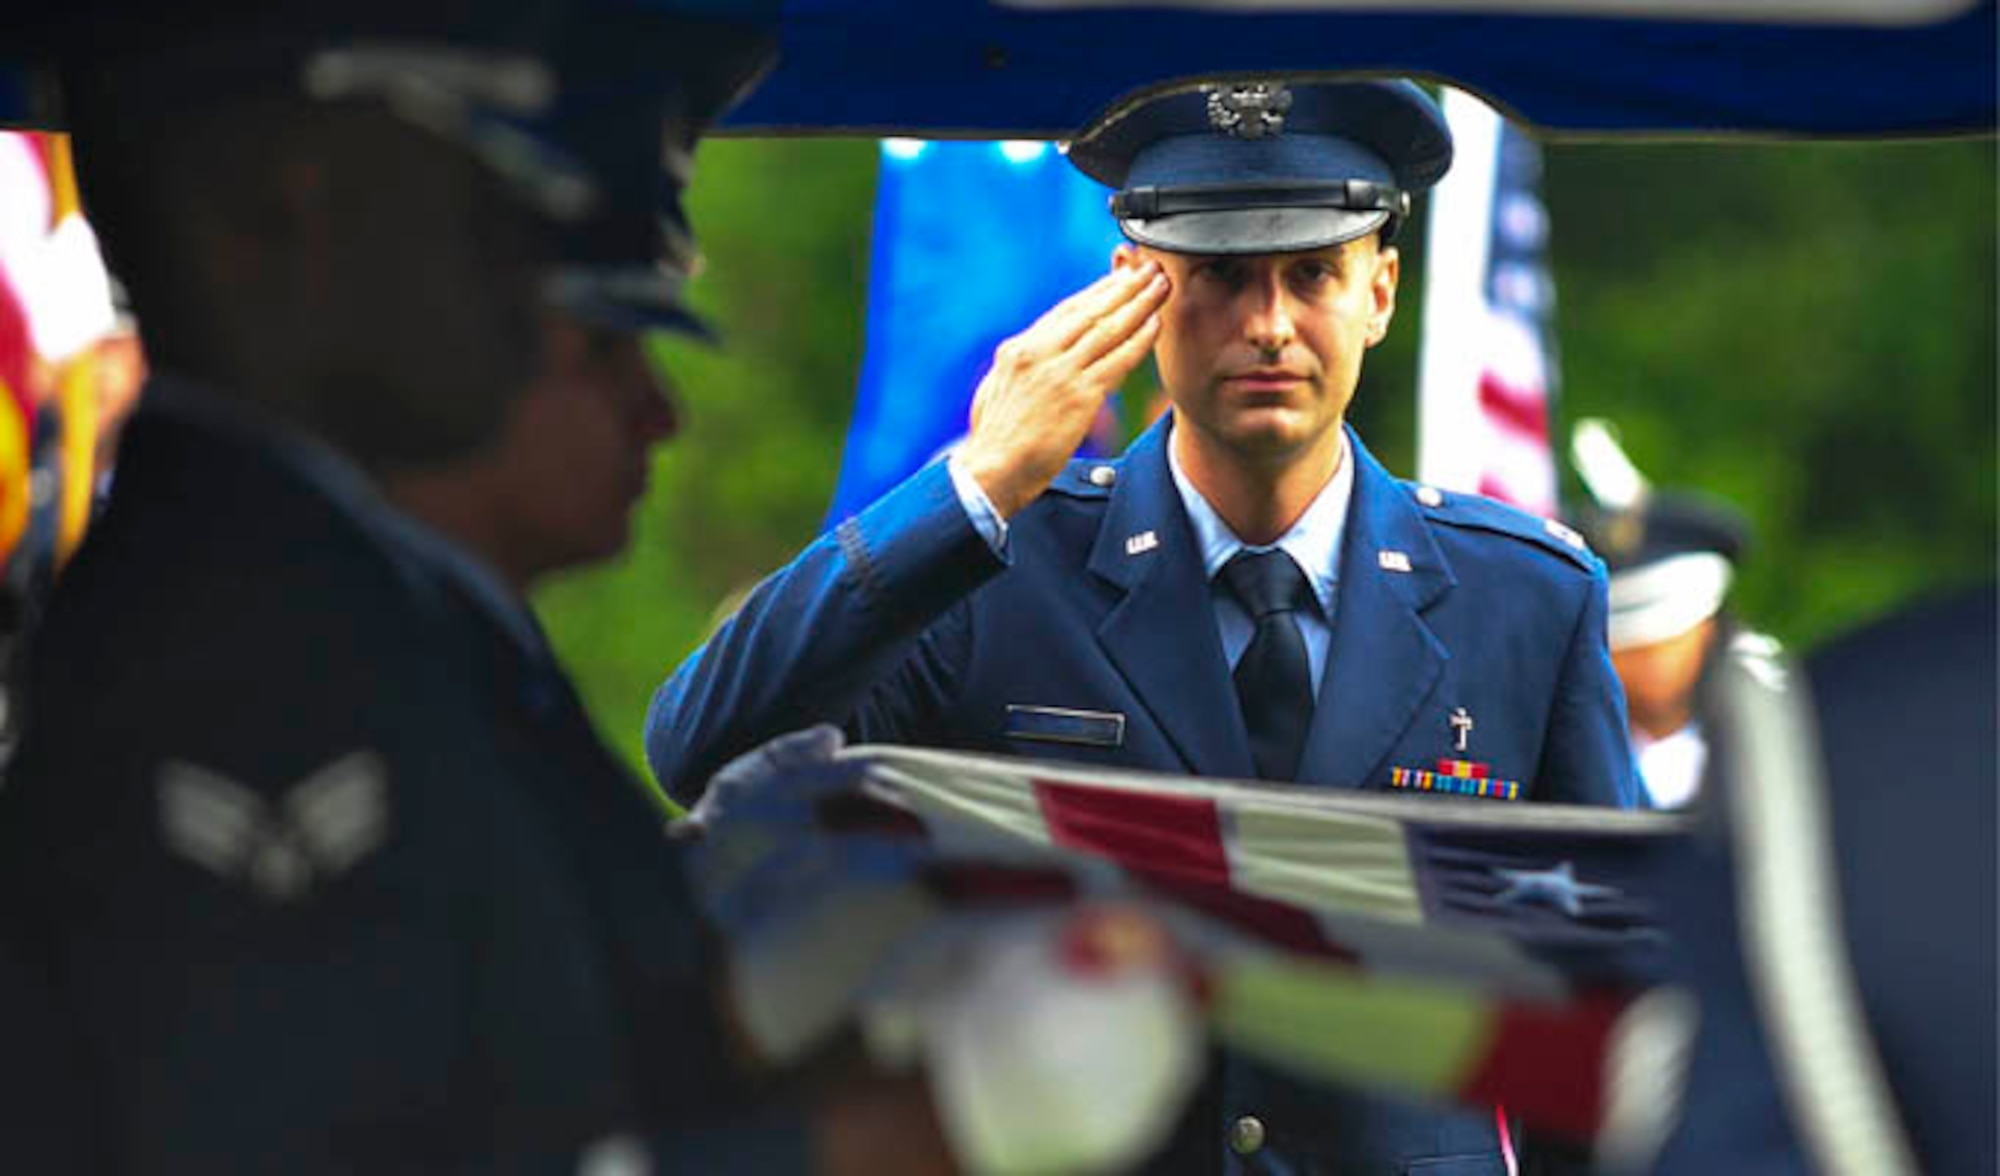 Chaplain (Capt.) Matthew Dussia salutes the remains of Capt. Robert Turnbull Sr., July 19, 2014 at Barnetts Creek Baptist Church Cemetery, Ga. Thomas County, Ga. Trunbull was one of 52 service members lost during a C-124 Globemaster crash in Alaska in 1952. Dussia is  a chaplain with the 325th Fighter Wing. (U.S. Air Force photo/Airman 1st Class Dustin Mullen)